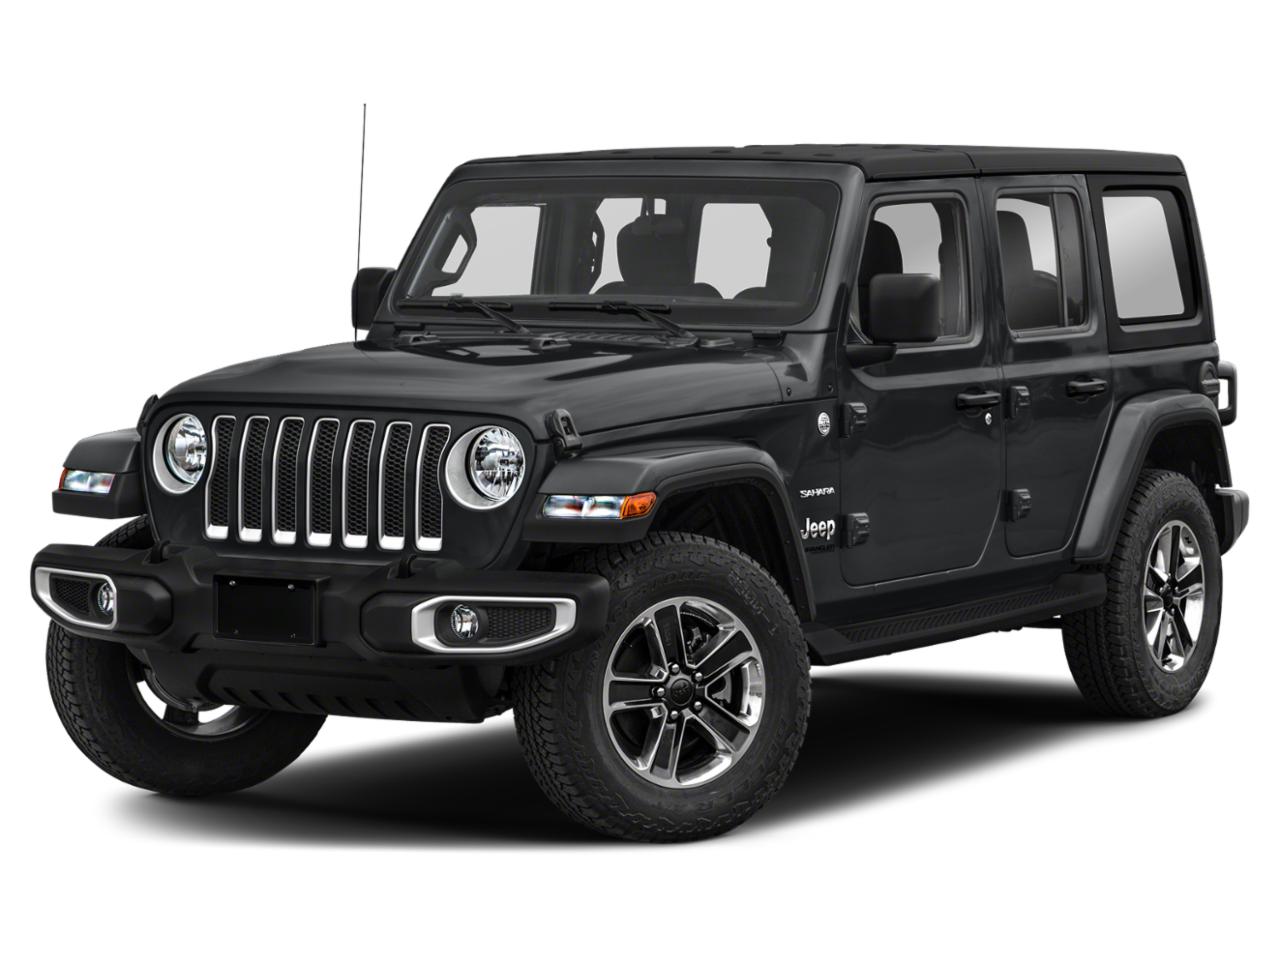 PORTSMOUTH - Used, Certified Jeep Wrangler Unlimited Vehicles for Sale